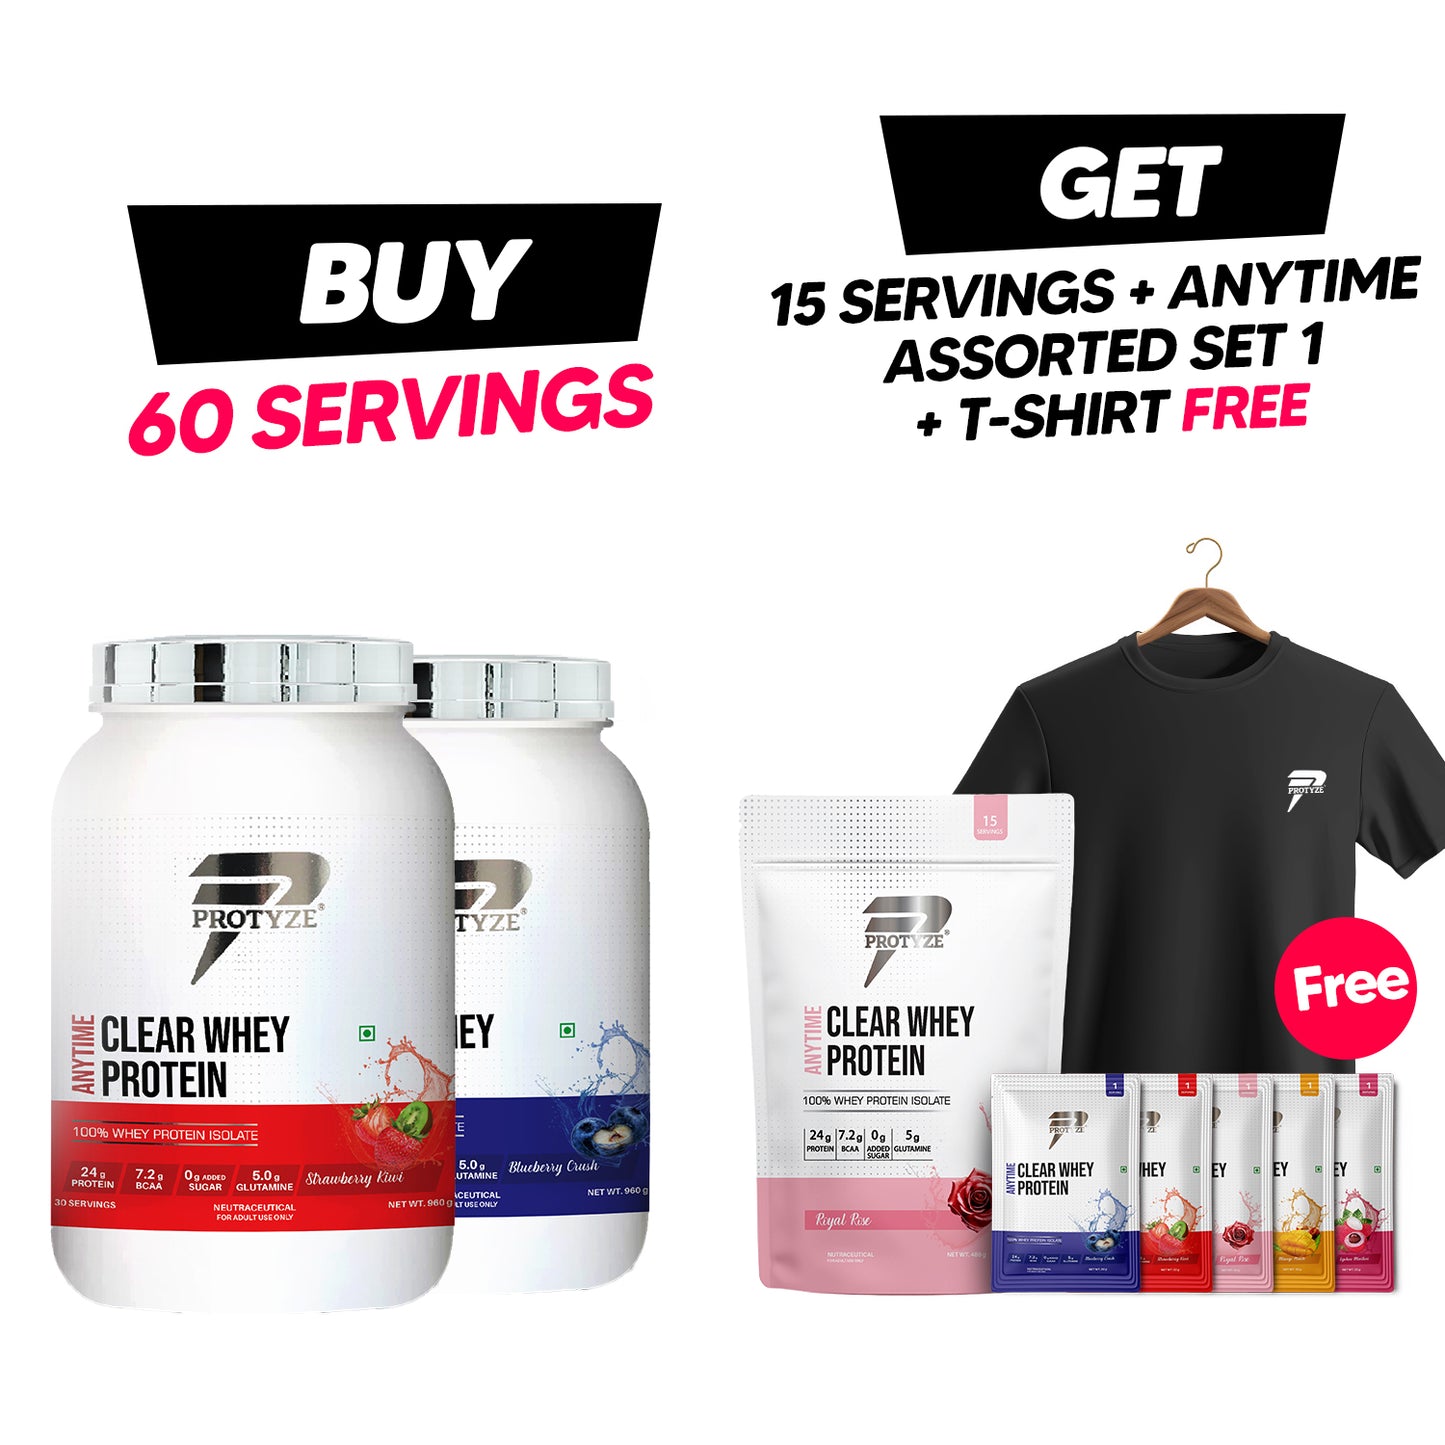 Protyze Anytime Clear Whey Jumbo Offer Buy 2 Jars - Get Anytime 15 Serving Pouch +Assorted Set 1 (Rose, mango peach, lychee martini, blueberry crush, strawberry kiwi) & T-Shirt Free